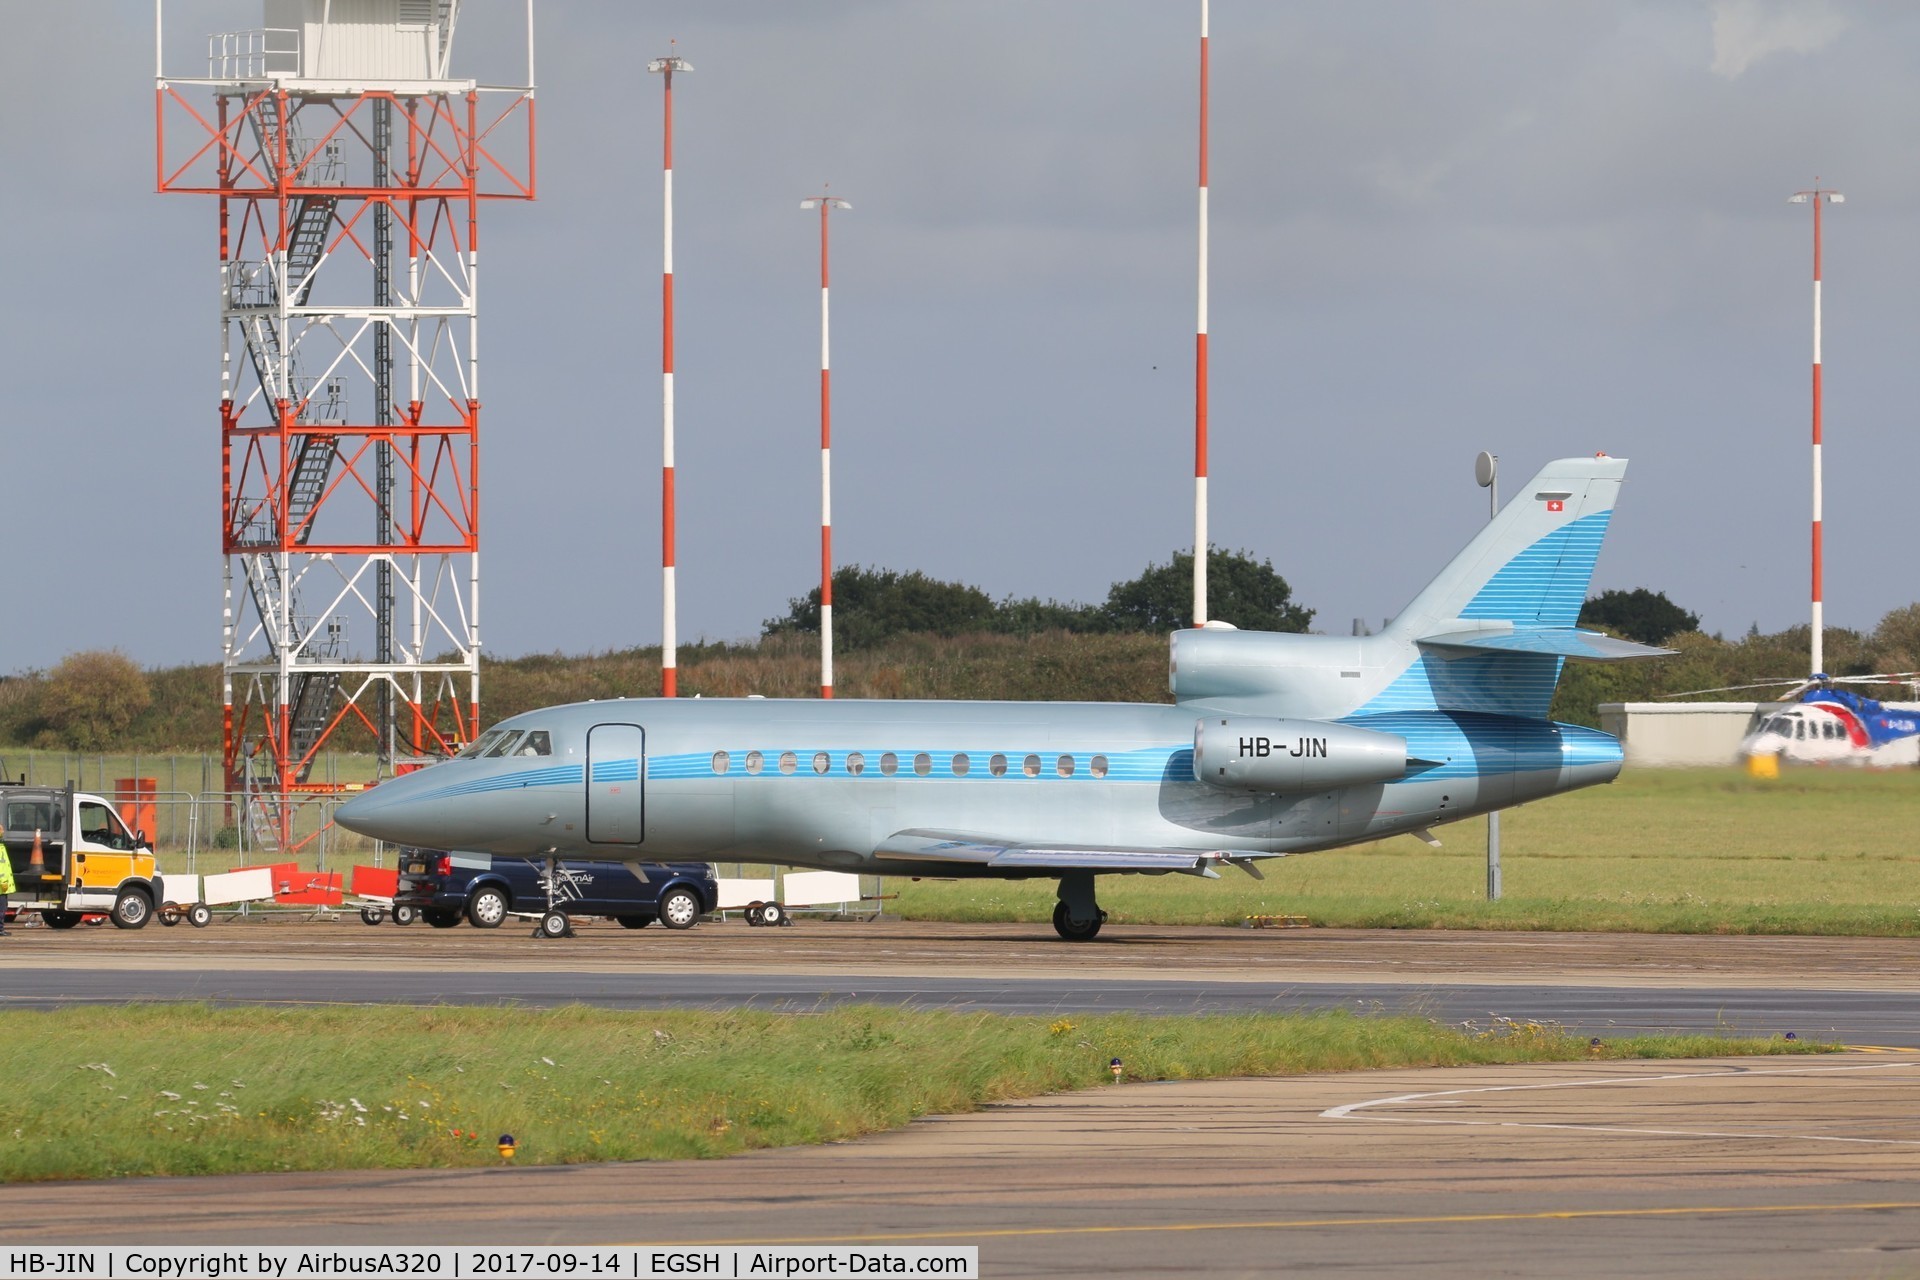 HB-JIN, 2002 Dassault Falcon 900EX C/N 107, Nice suprise visitor to Norwich